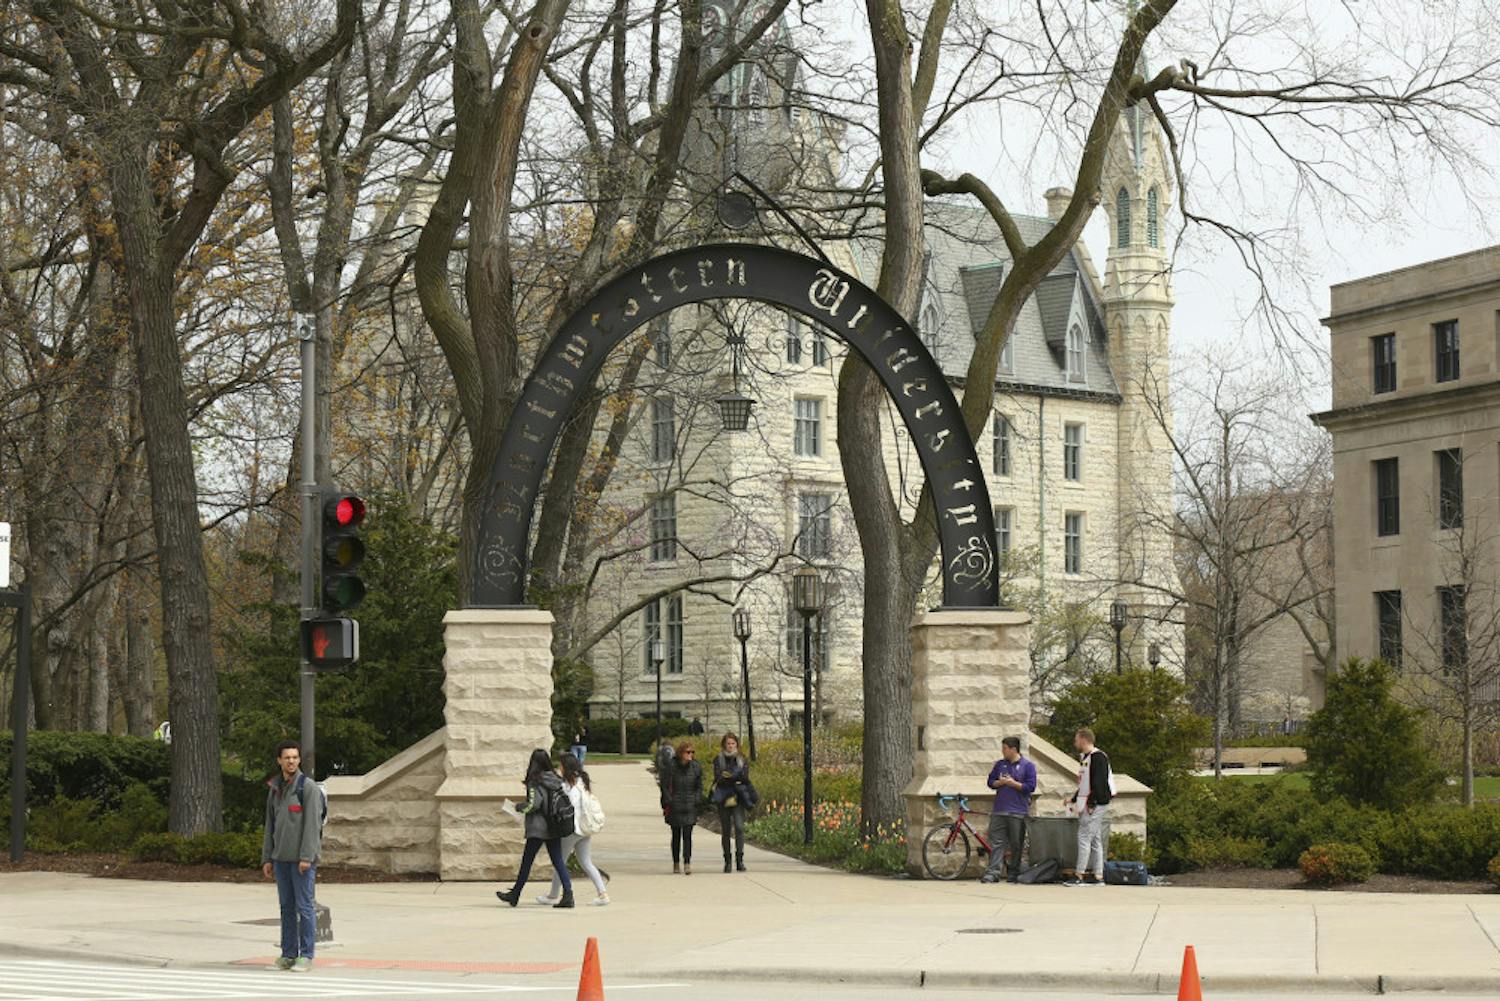 In this Friday, April 29, 2016, photo, people stand near the entrance gate to Northwestern University in Evanston, Ill. Northwestern University's student newspaper is under fire. Their first critics came from within the campus as student activists questioned journalists’ coverage of protests. Within days, editors decided to write a statement apologizing but their editorial prompted a second round of criticism from journalists around the country starting Monday, Nov. 11, 2019. (Chris Walker/Chicago Tribune via AP)